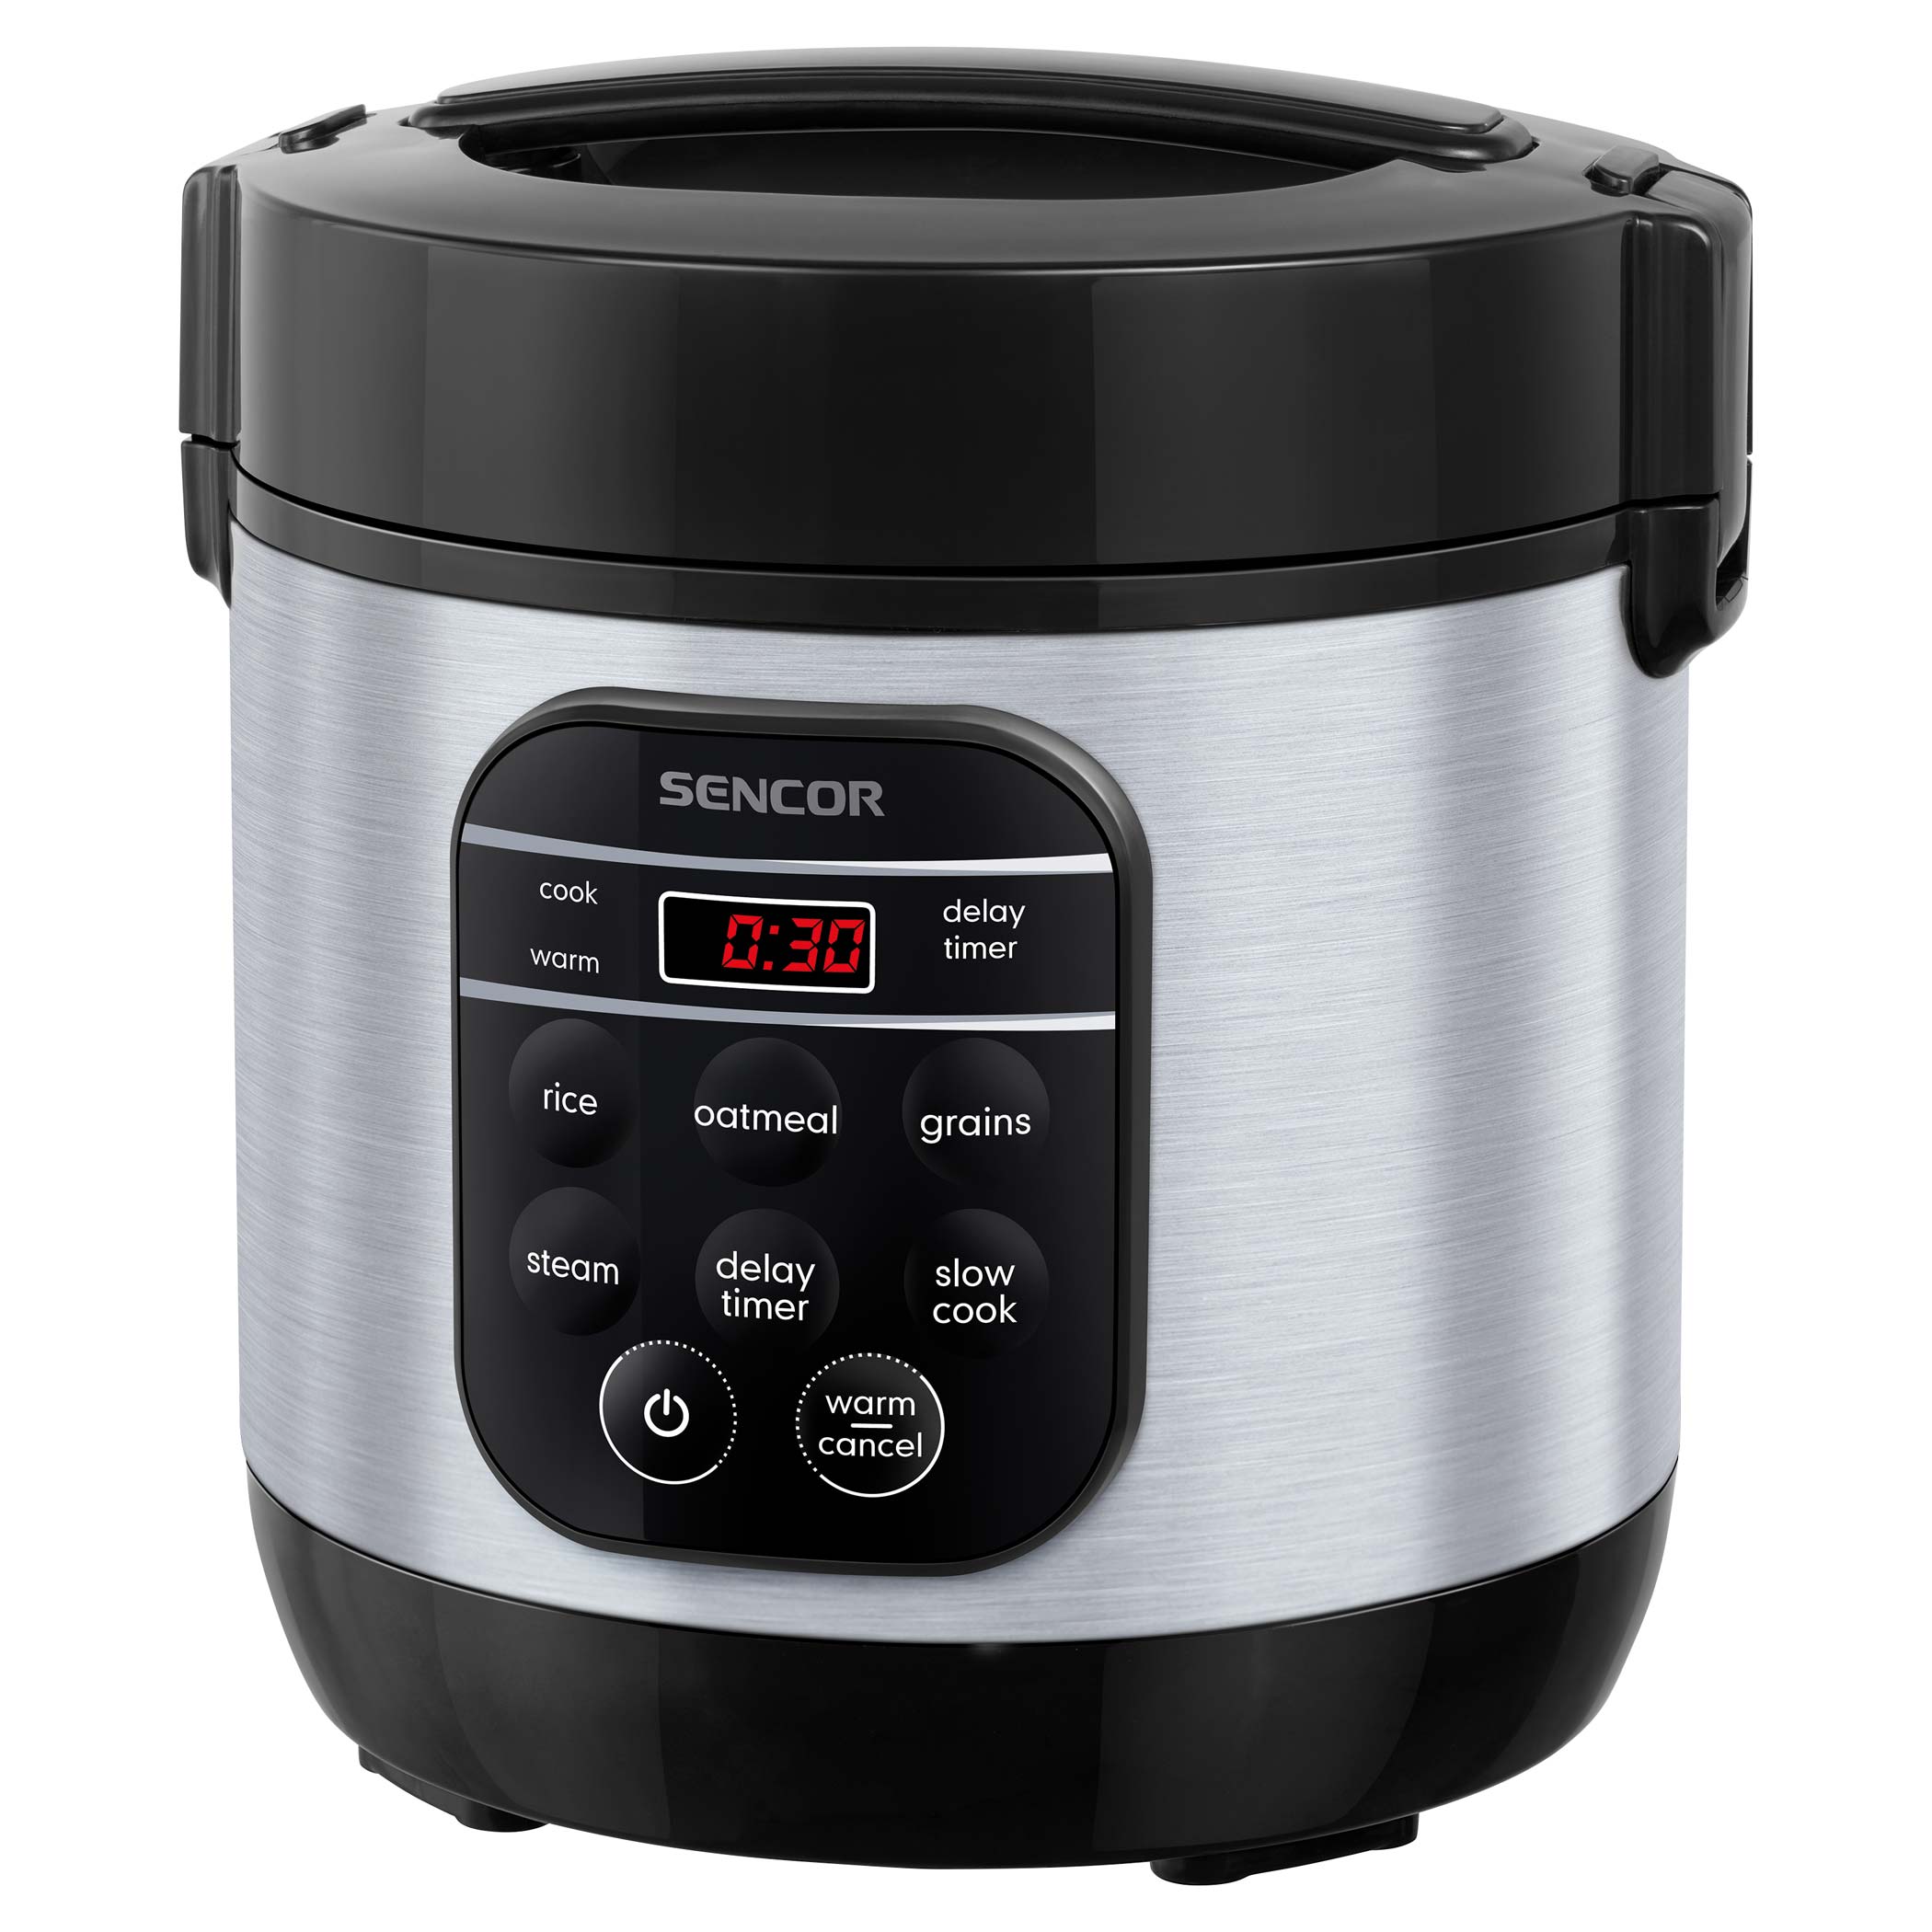 Small Multifunction Electric Rice Cooker: A Must-Have Appliance